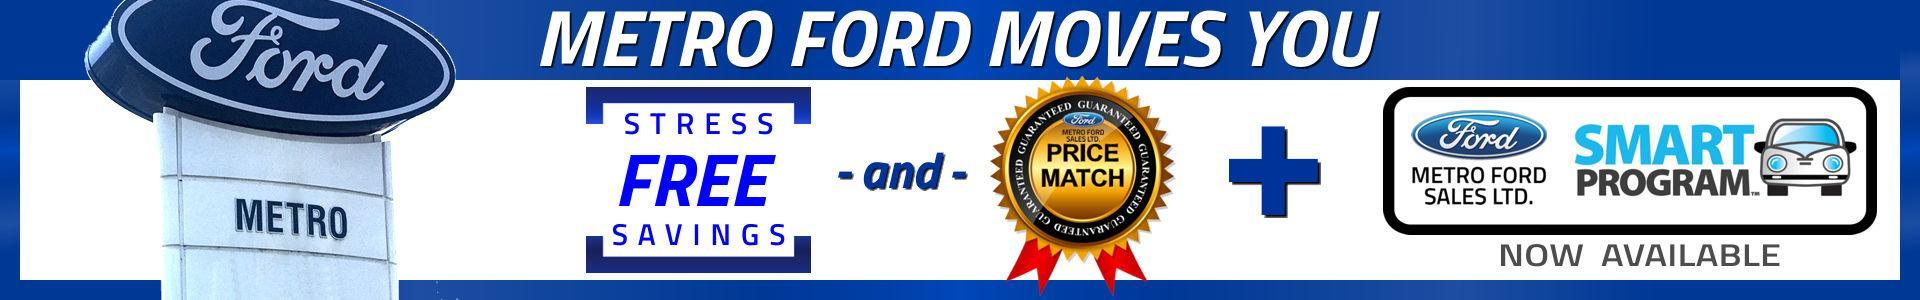 Stress-free Savings, your shopping difference at Metro Ford, Calgary, Alberta